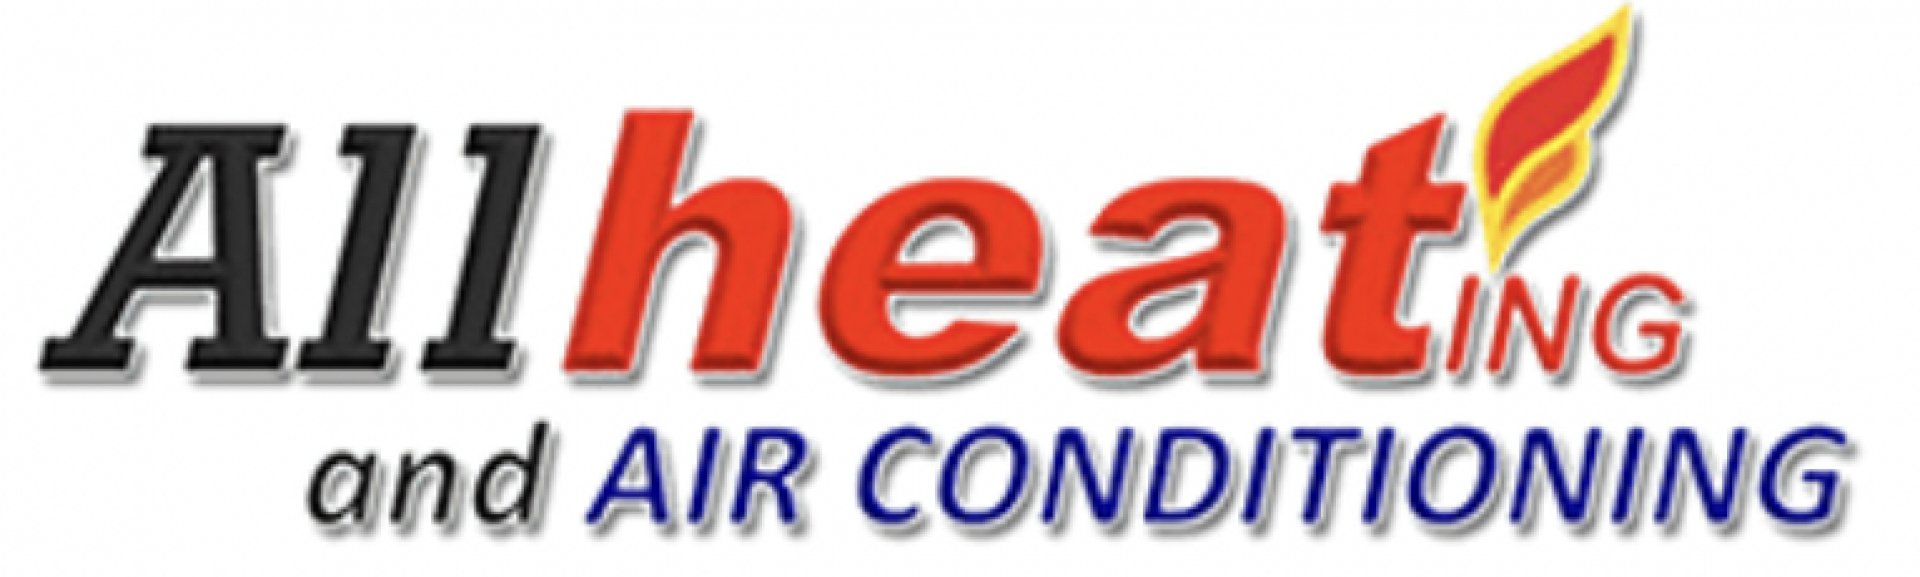 All Heating and Air Conditioning logo